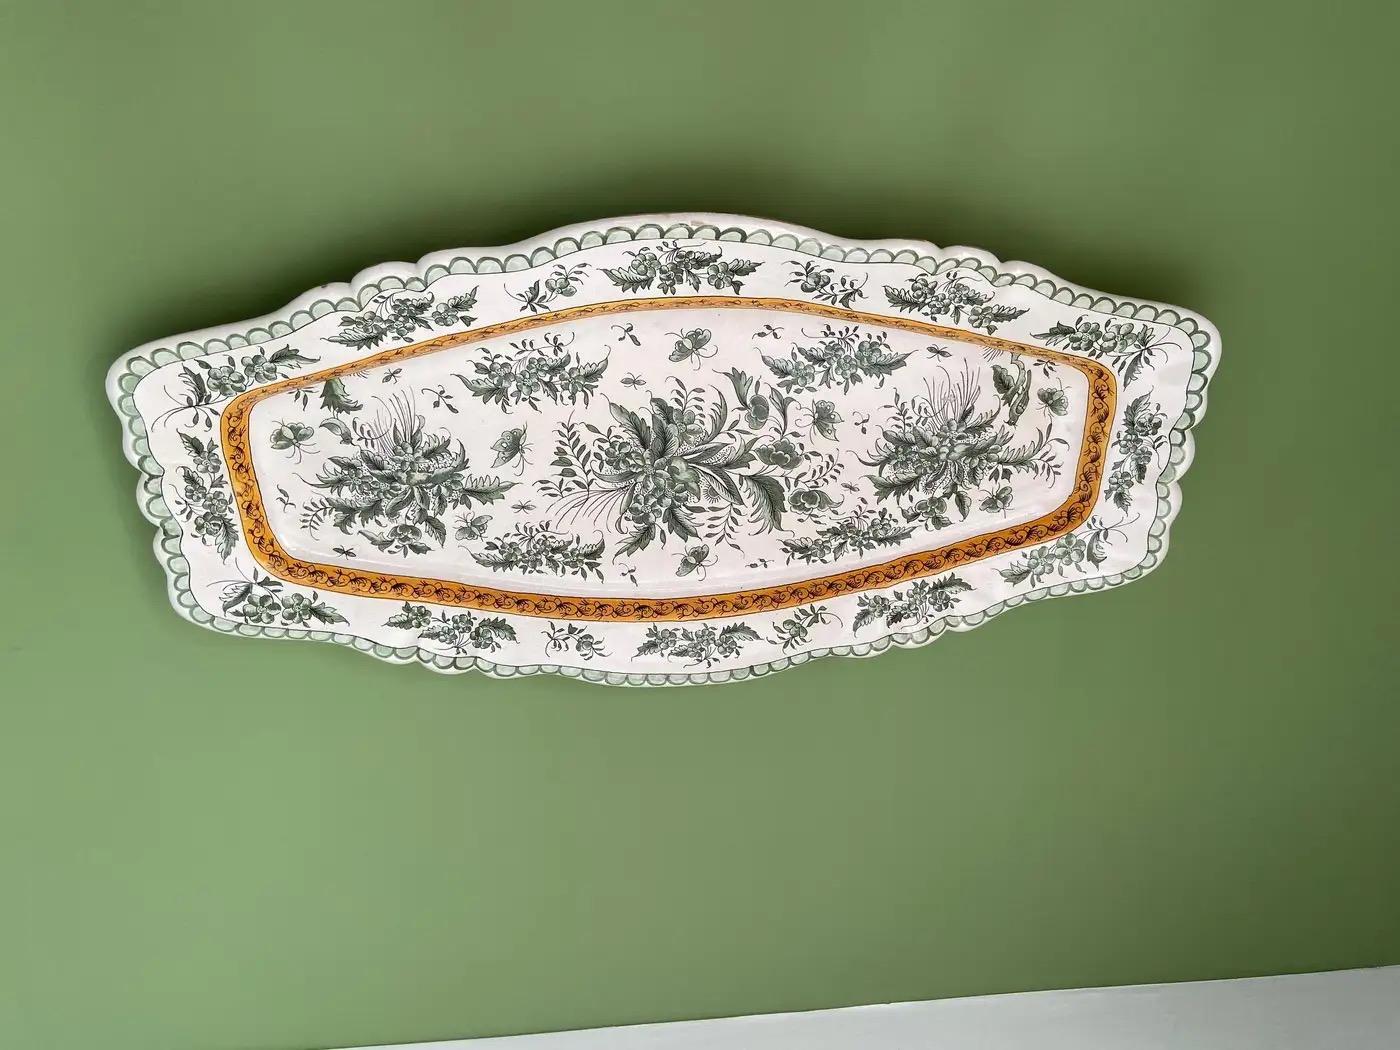 Glazed Antique Oblong Ceramic Wall Platter in White and Green, France, 19th Century For Sale